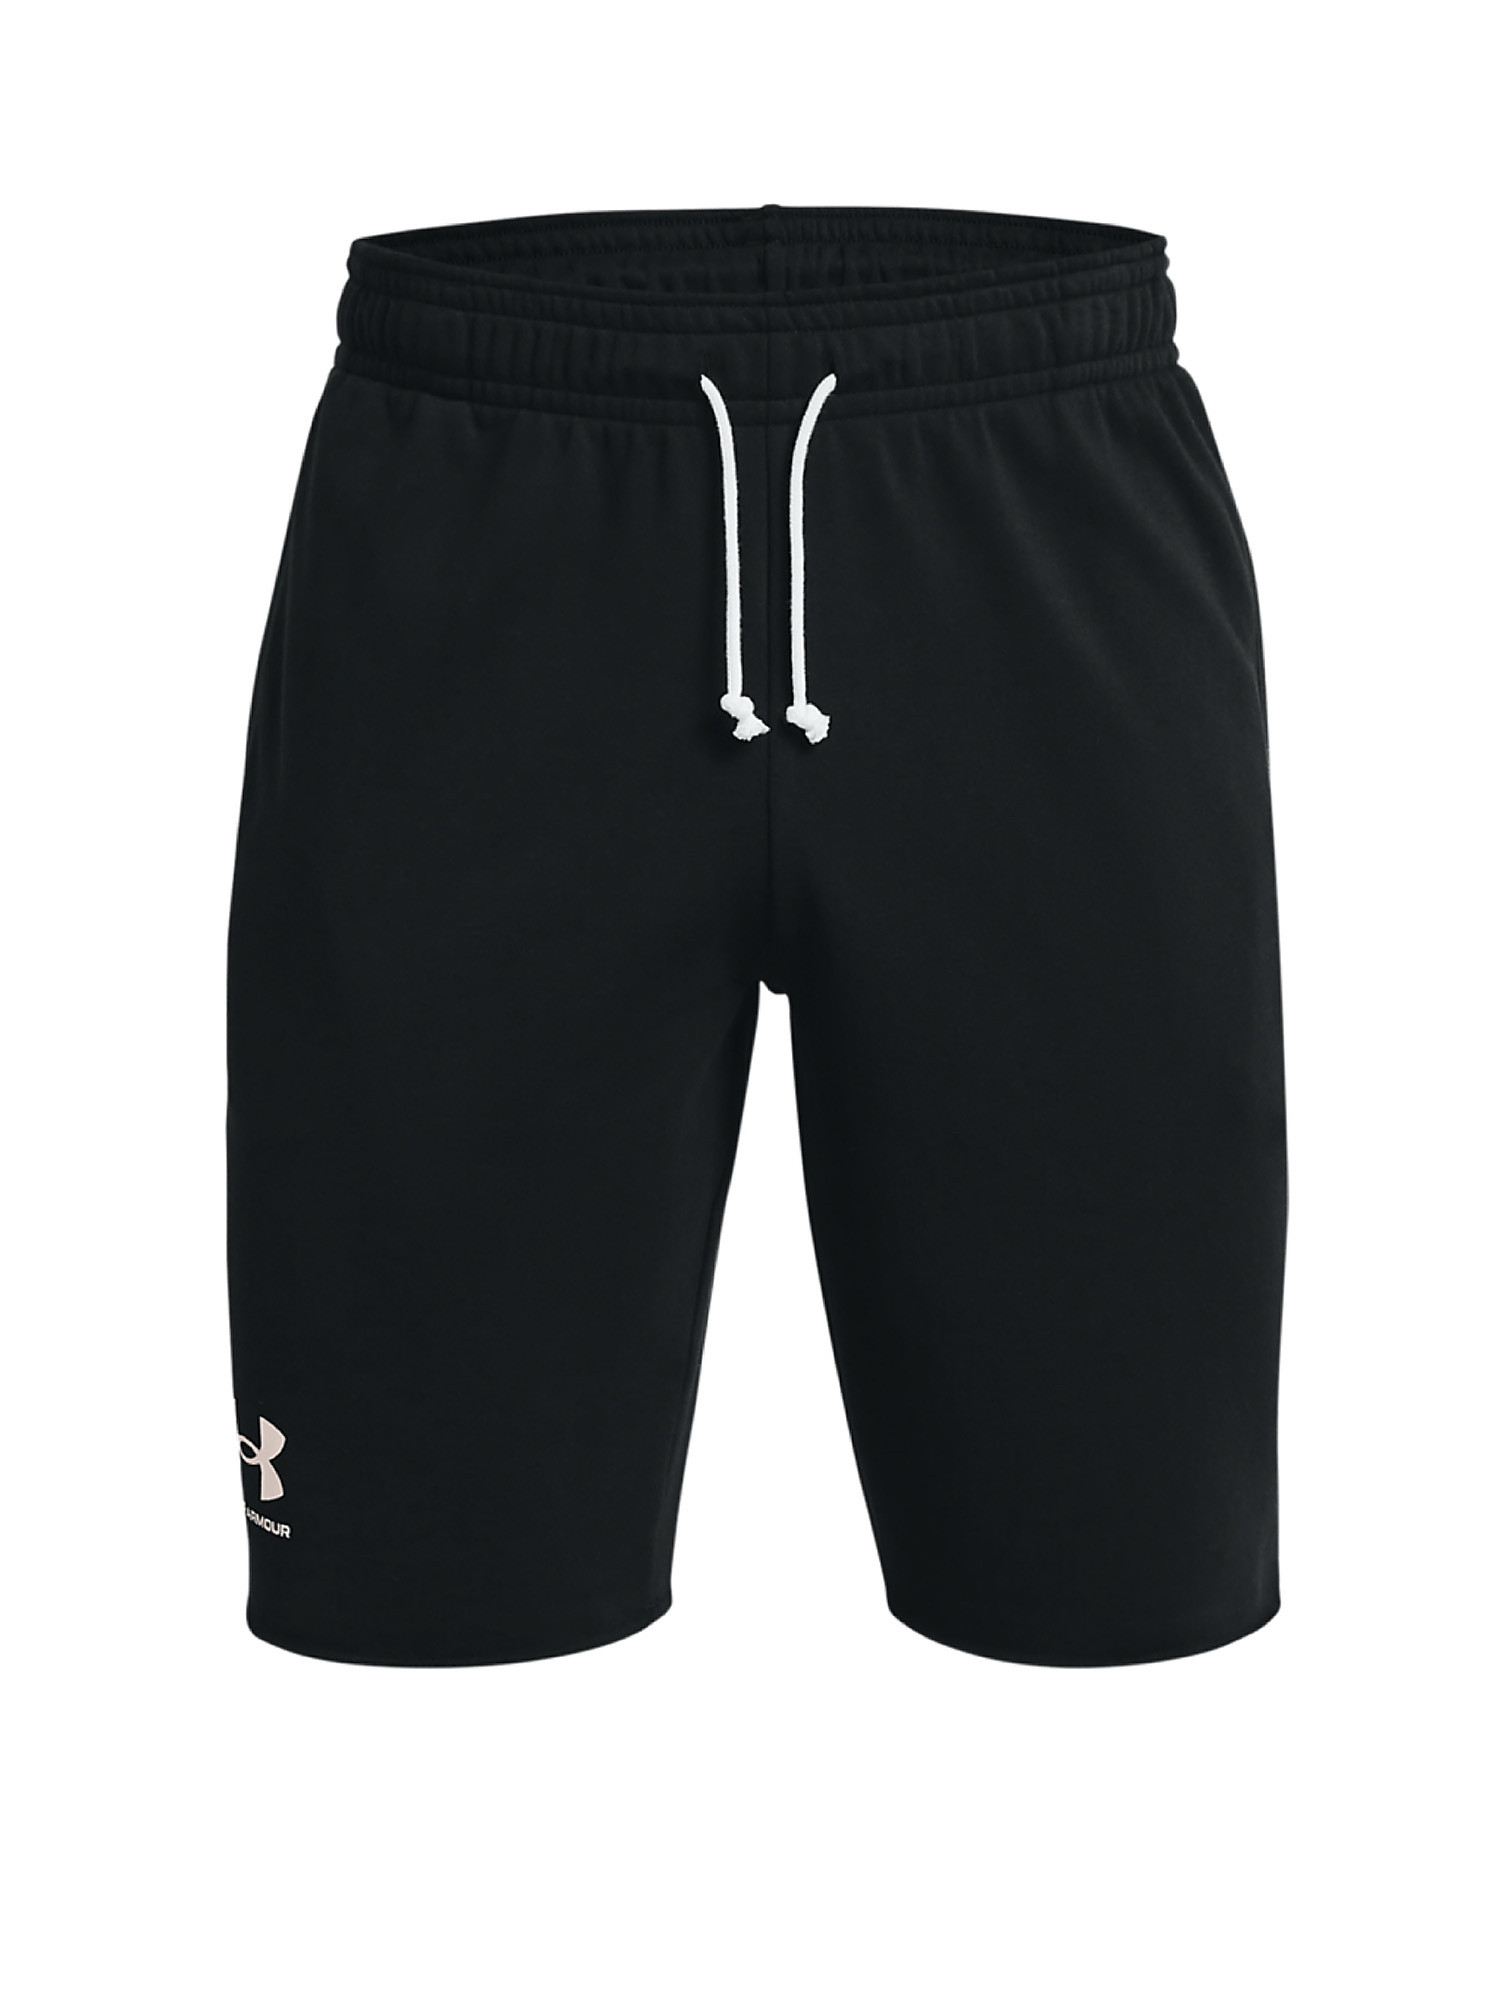 Under Armour - Shorts UA Rival Terry, Nero, large image number 0